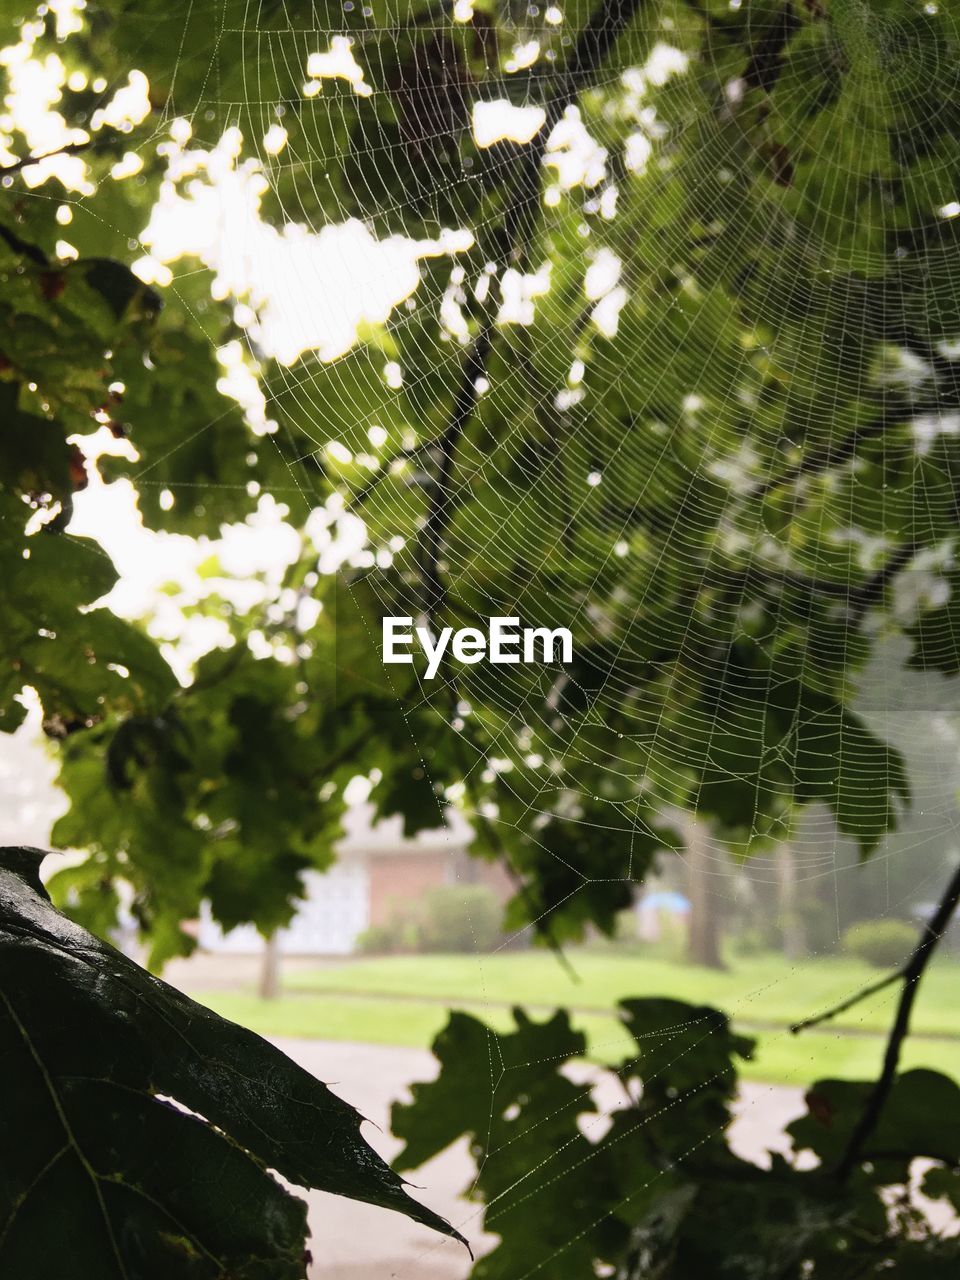 CLOSE-UP OF WATER DROPS ON SPIDER WEB ON TREE